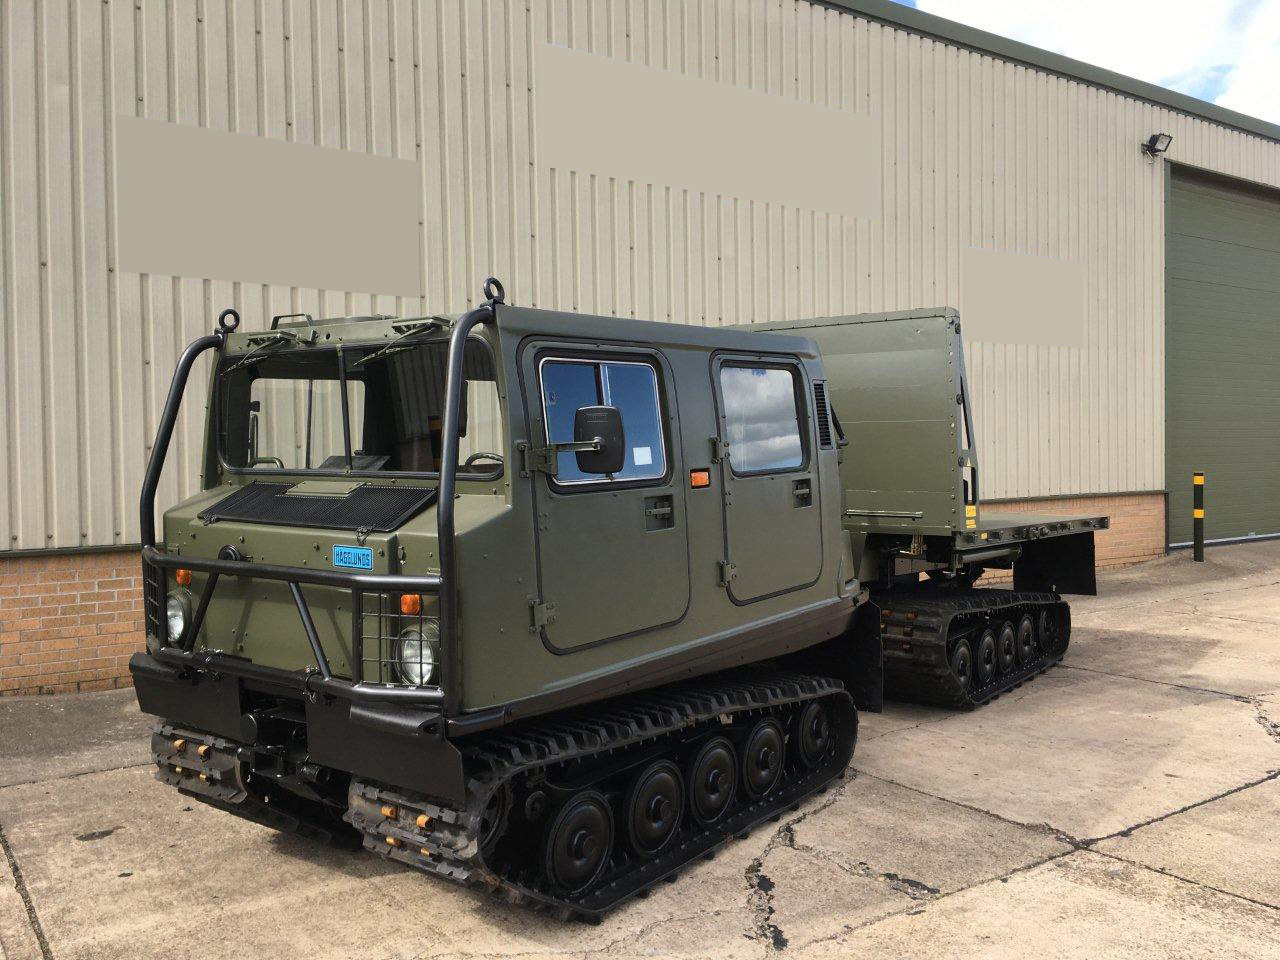 Hagglunds Bv206 Load Carrier with Crane - Govsales of ex military vehicles for sale, mod surplus